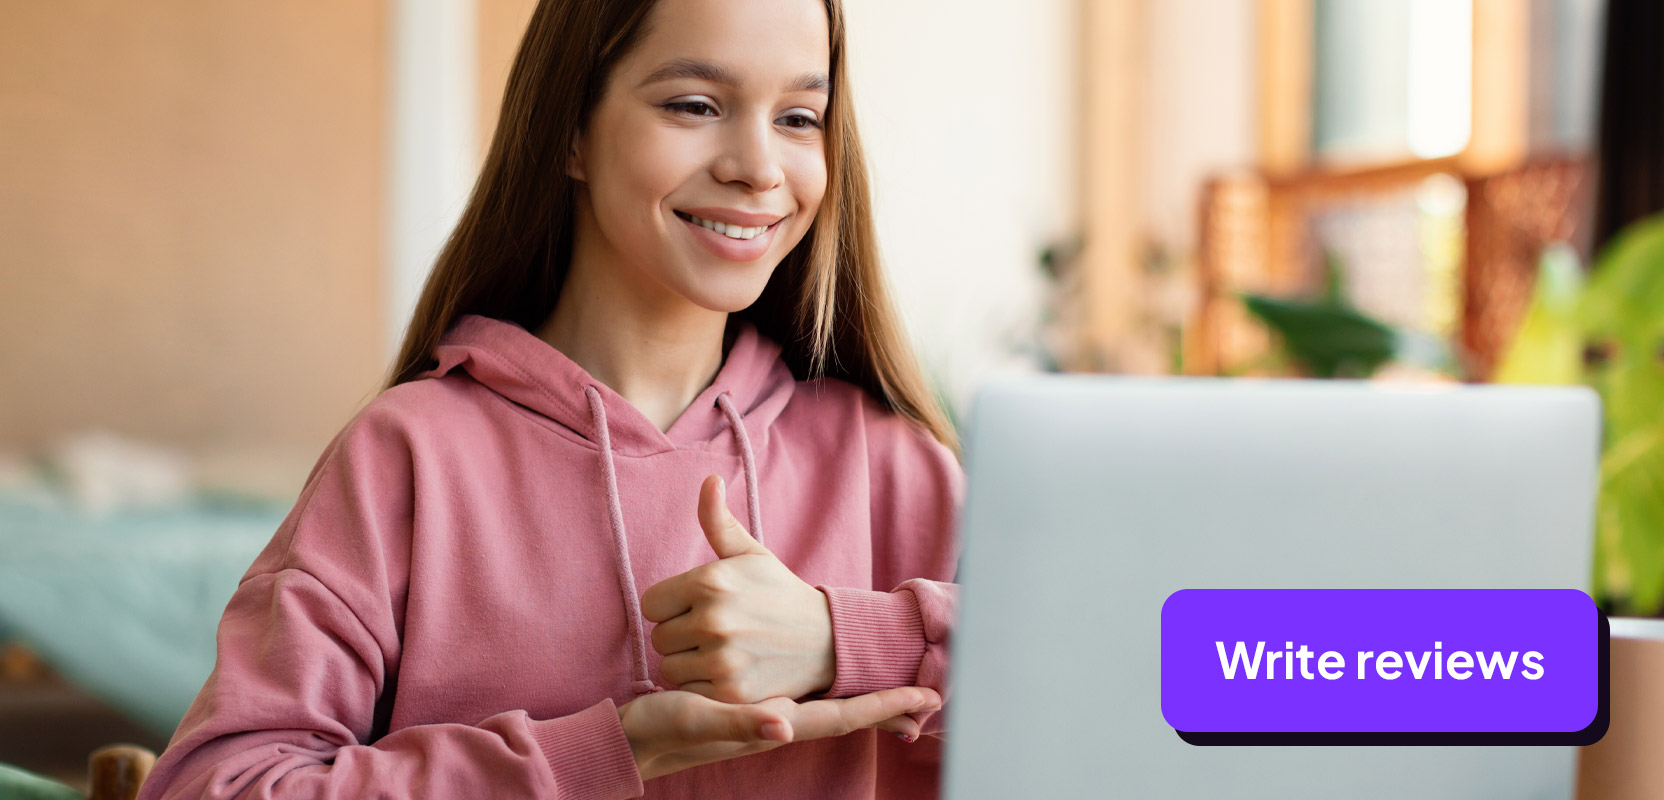 Teenage freelancer giving a thumbs-up sign to her laptop representing reviewing a product